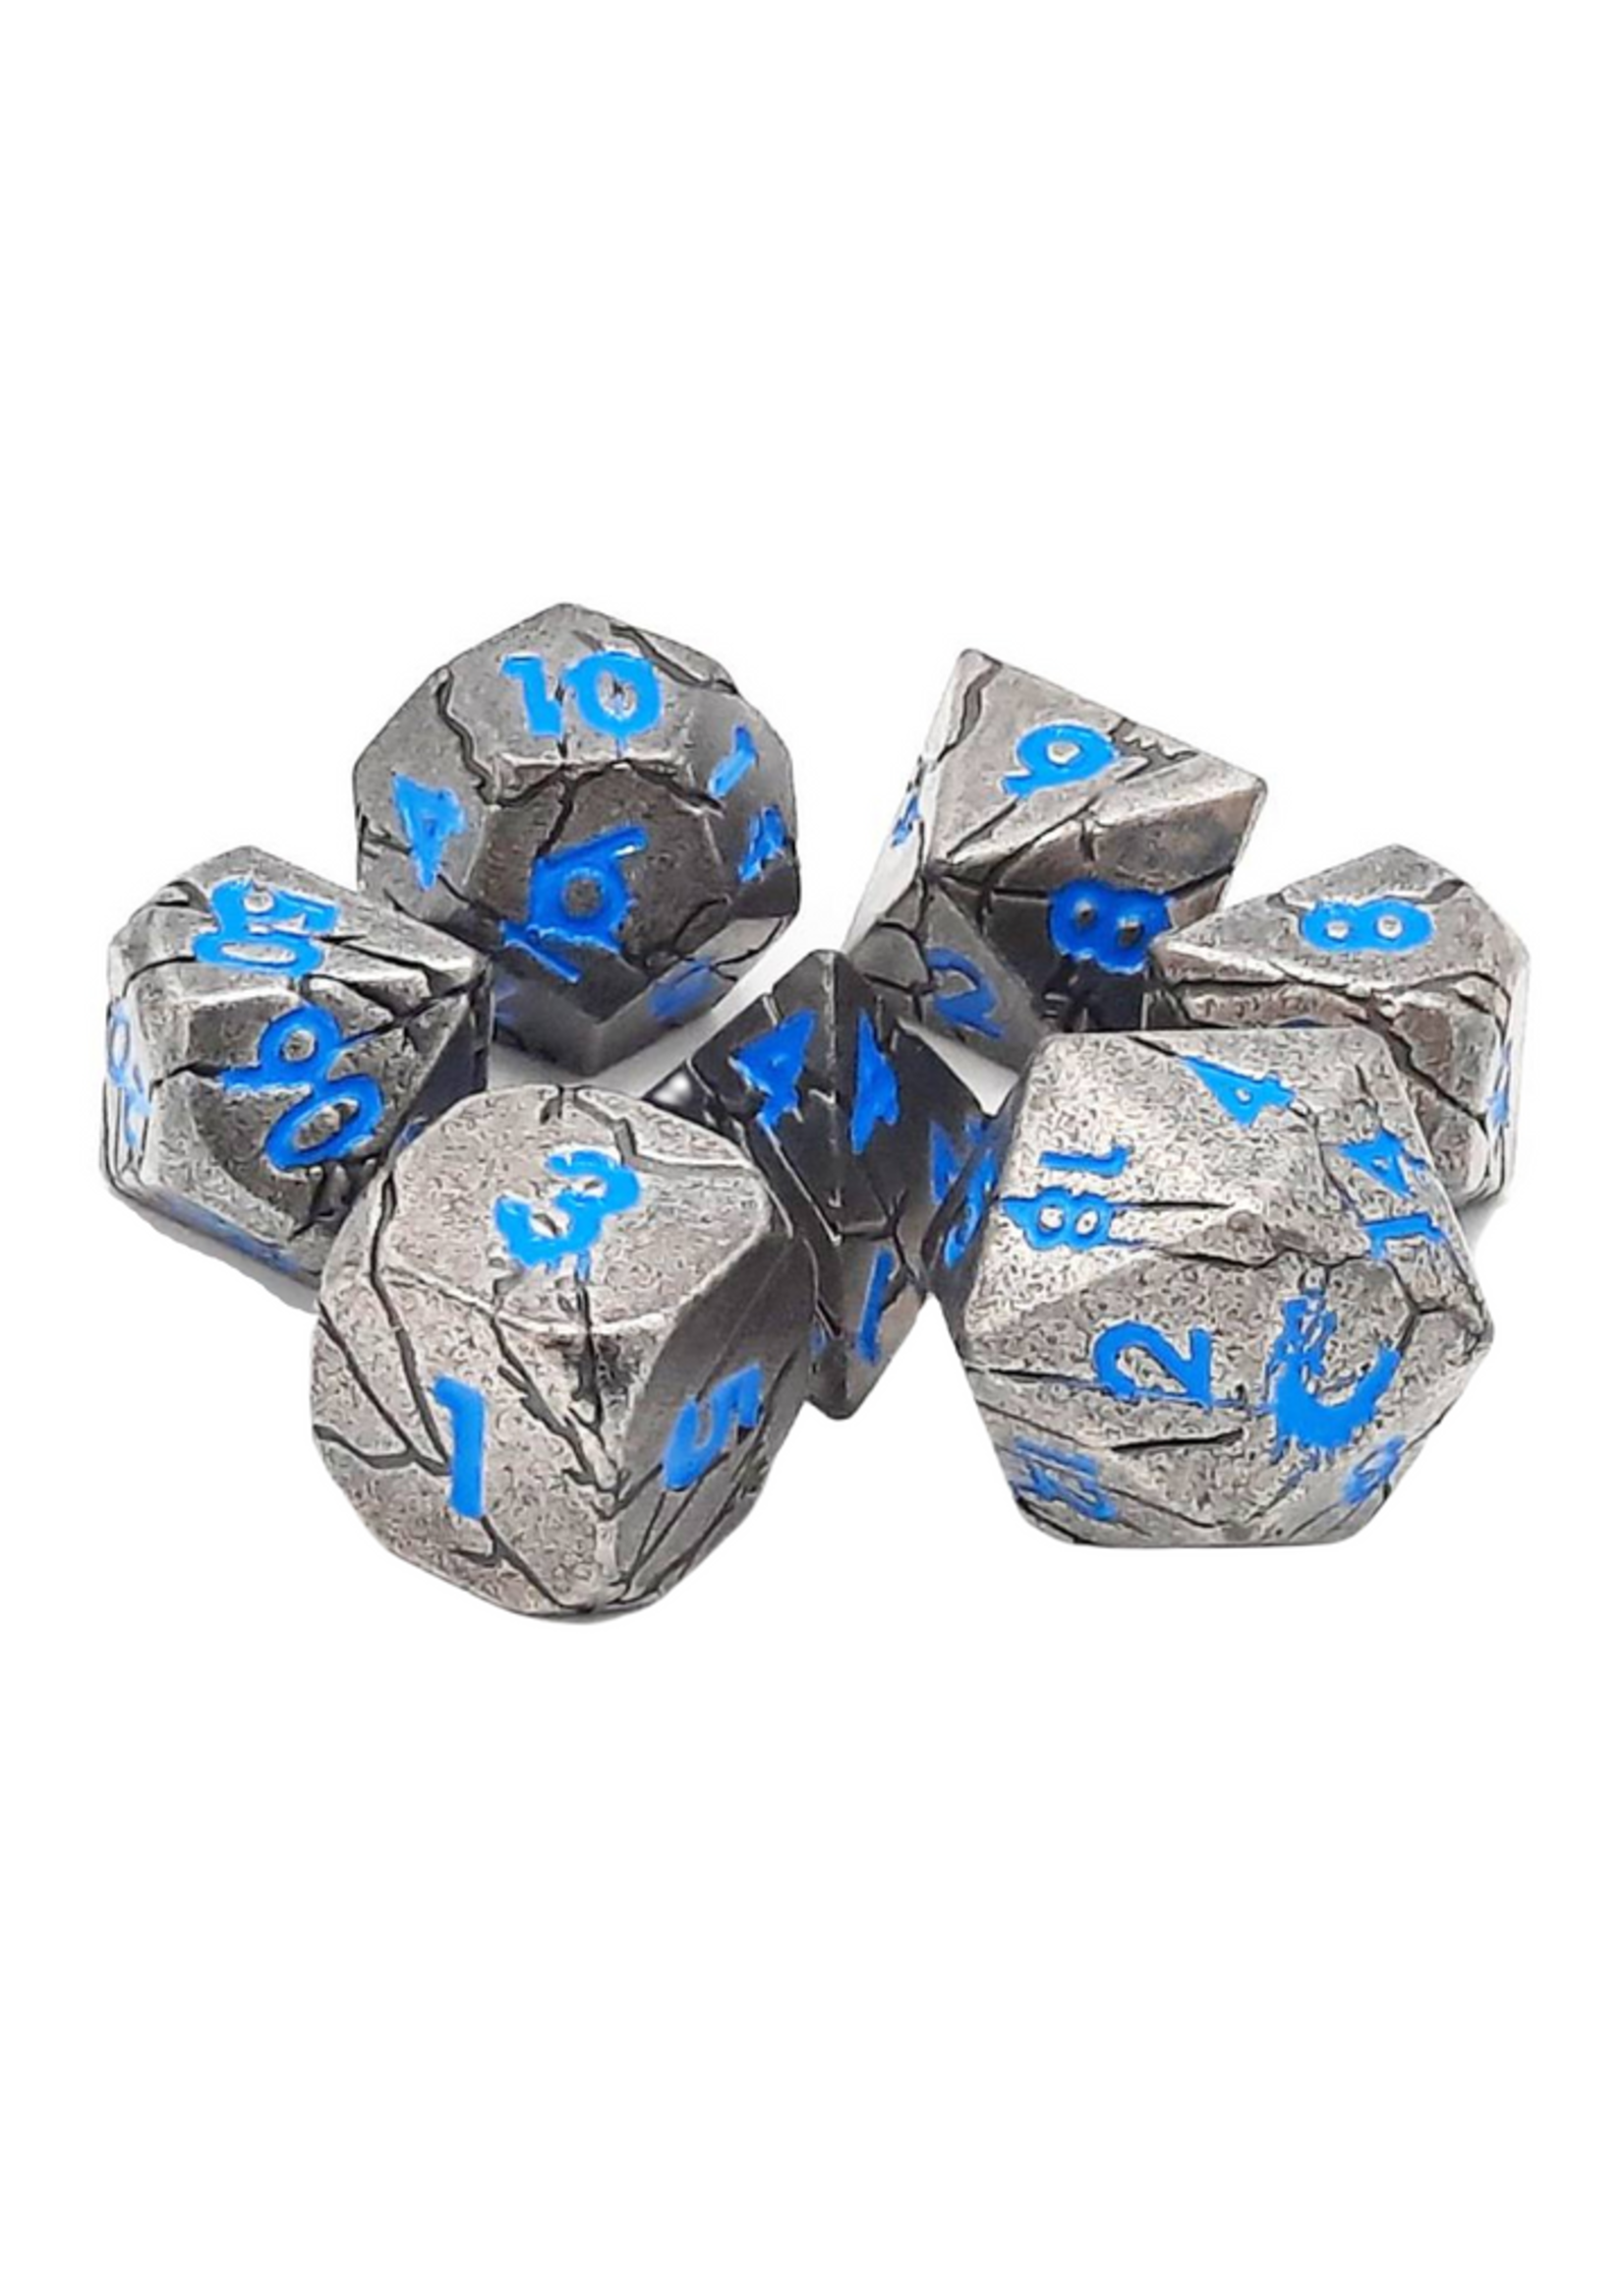 Old School Dice Old School 7 Piece RPG Metal Dice Set: Orc Forged -Ancient Silver w/ Blue